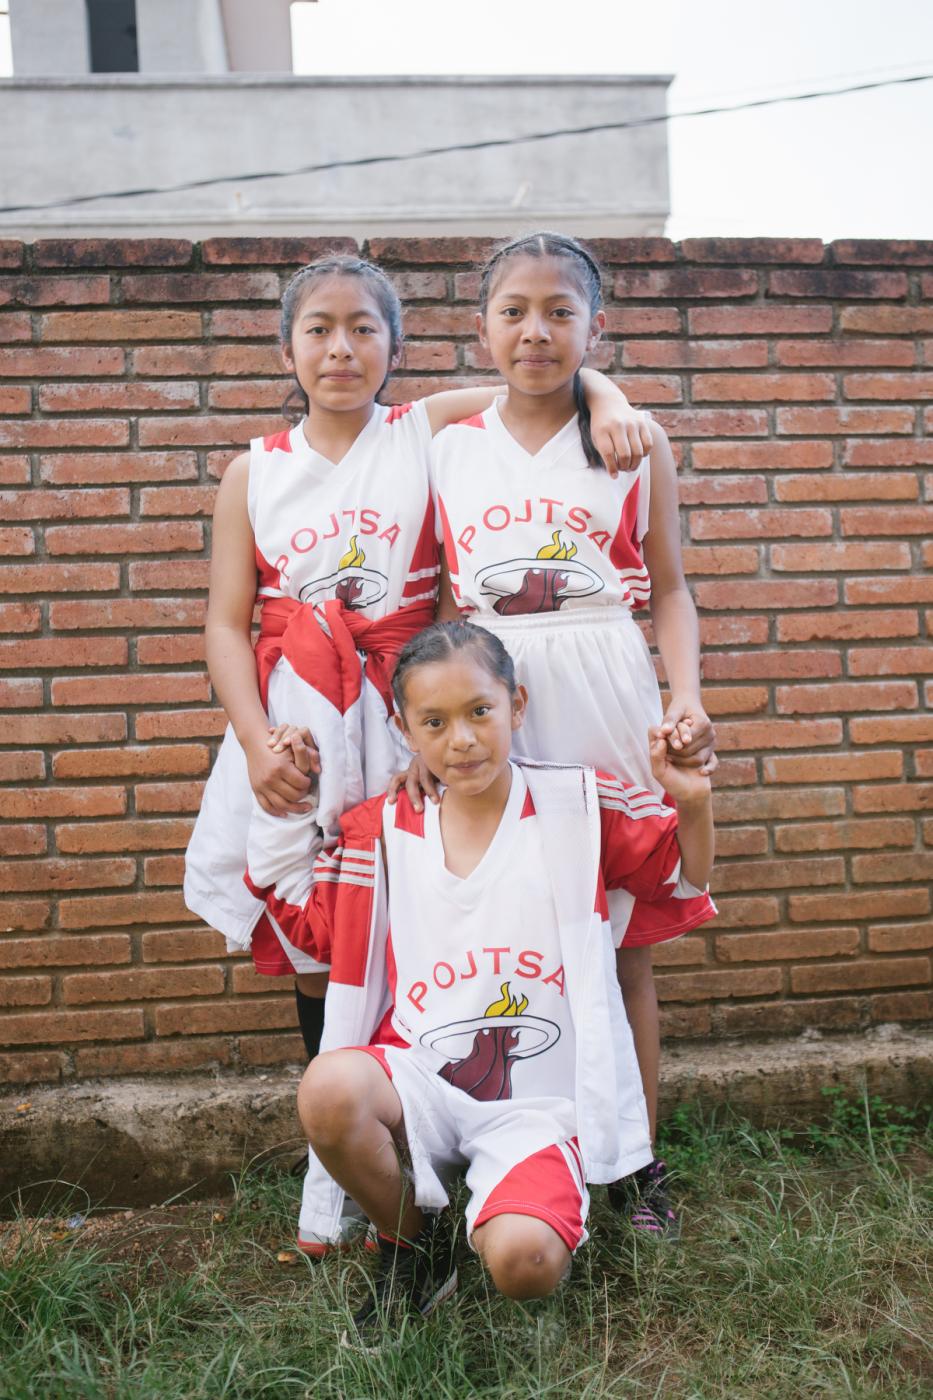 Image from Basketball in the Sierra Norte of Oaxaca - Brisceyda Martinez Antonio (left to right),10, Mayra...